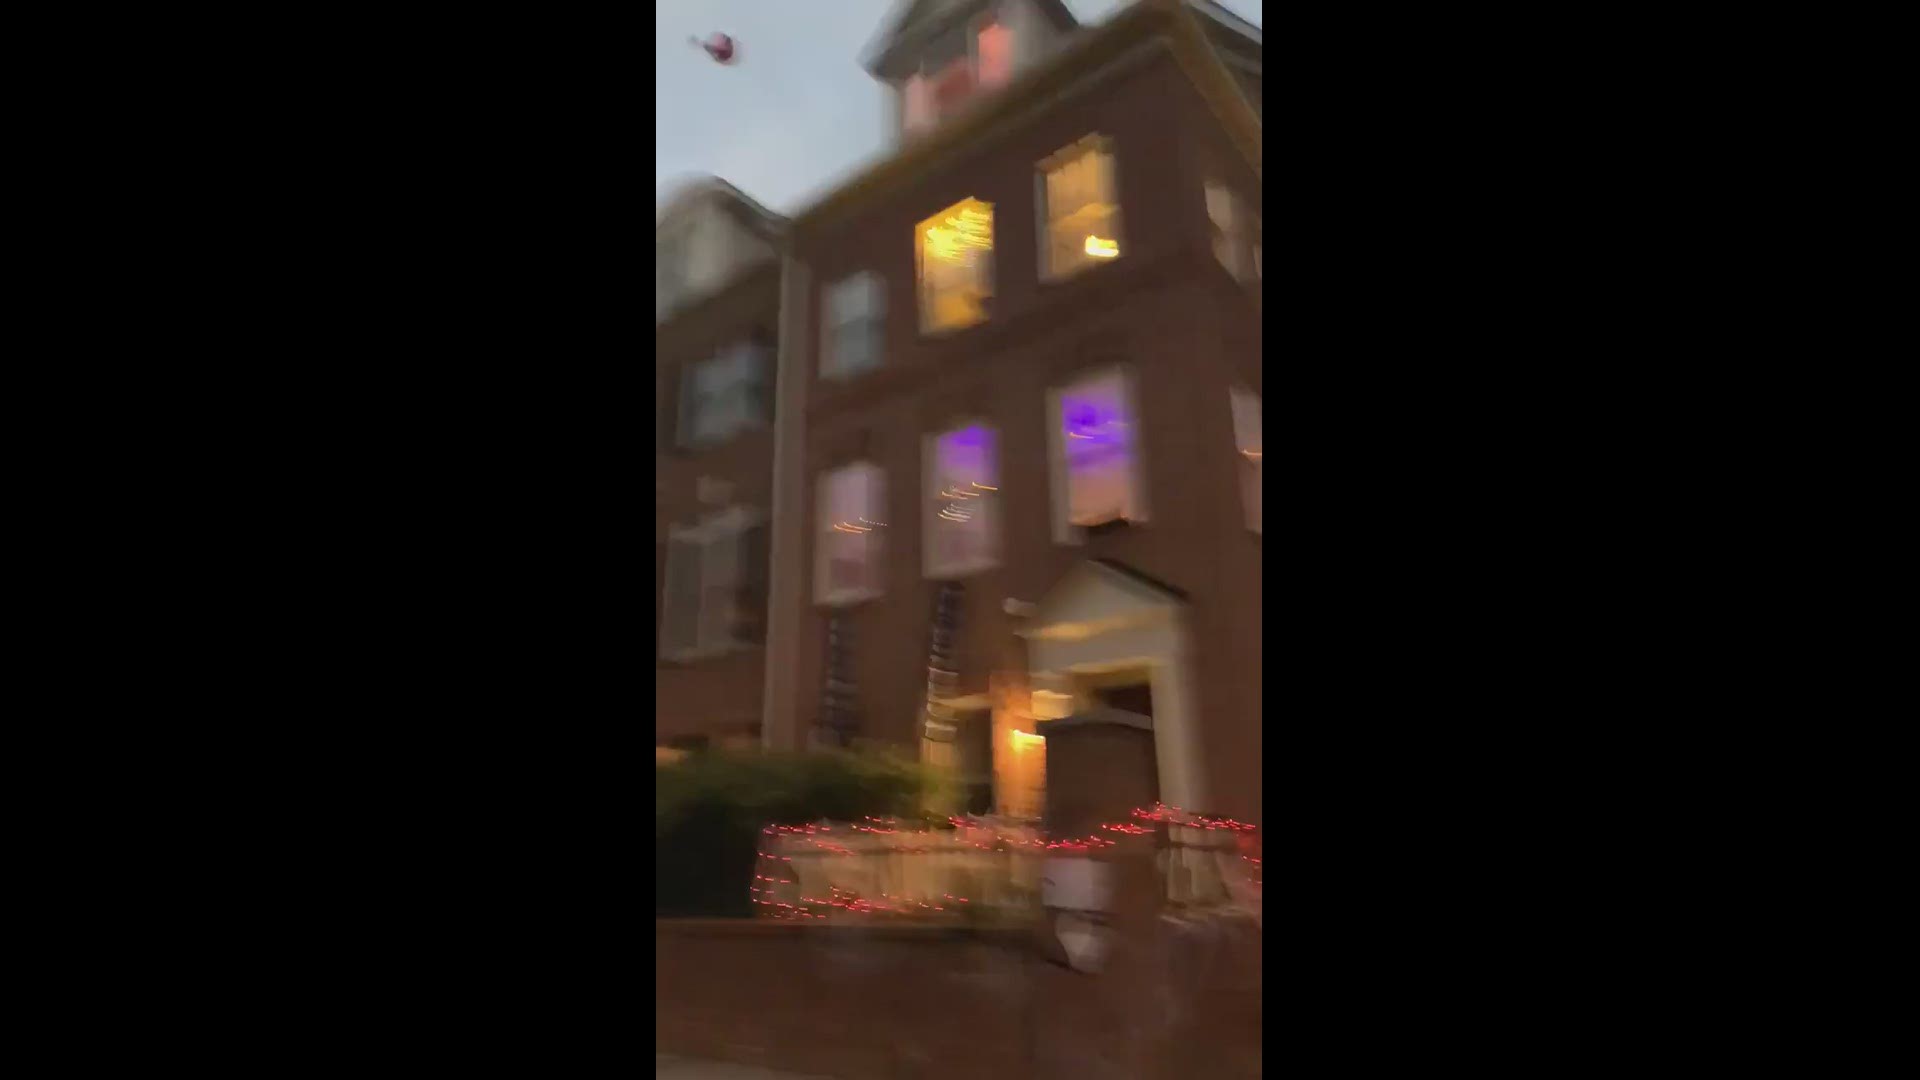 A couple in McLean, Virginia, got creative with parachutes in order to get candy to trick or treaters during the COVID-19 pandemic.